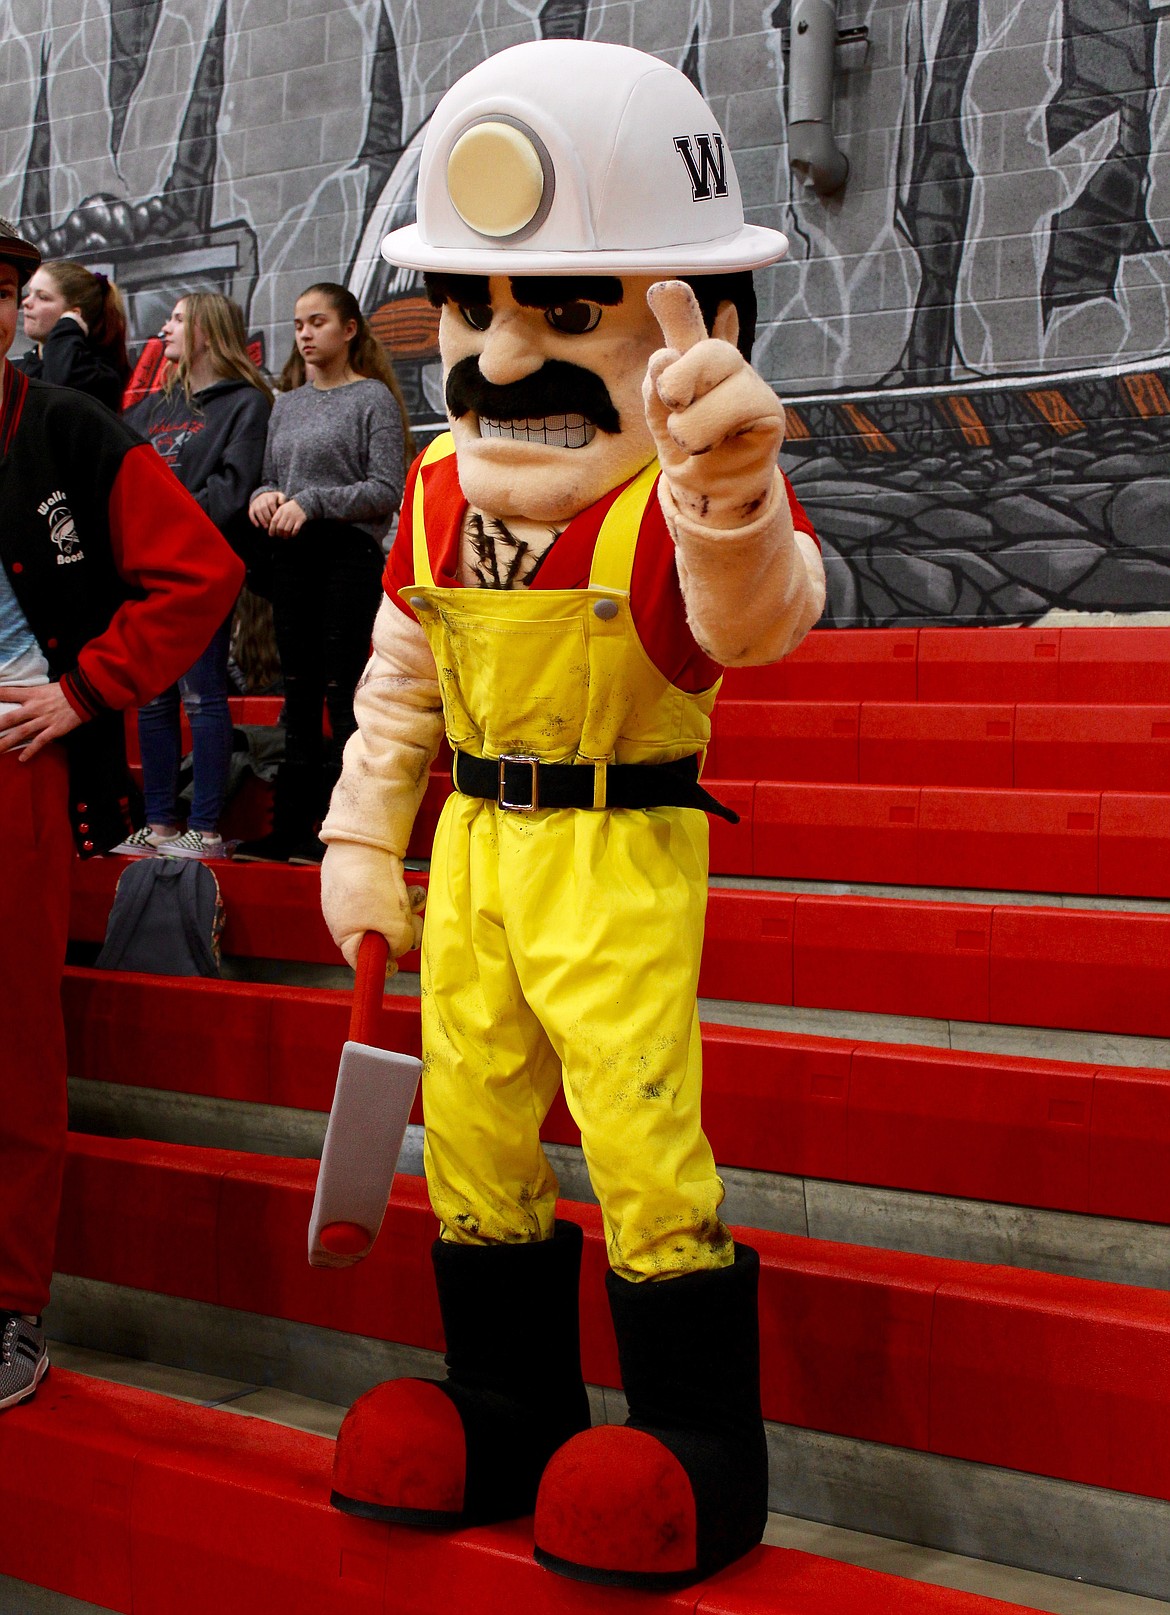 Marty the Miner says that the Wallace Miners are No. 1 during their basketball game against Clark Fork on Tuesday.